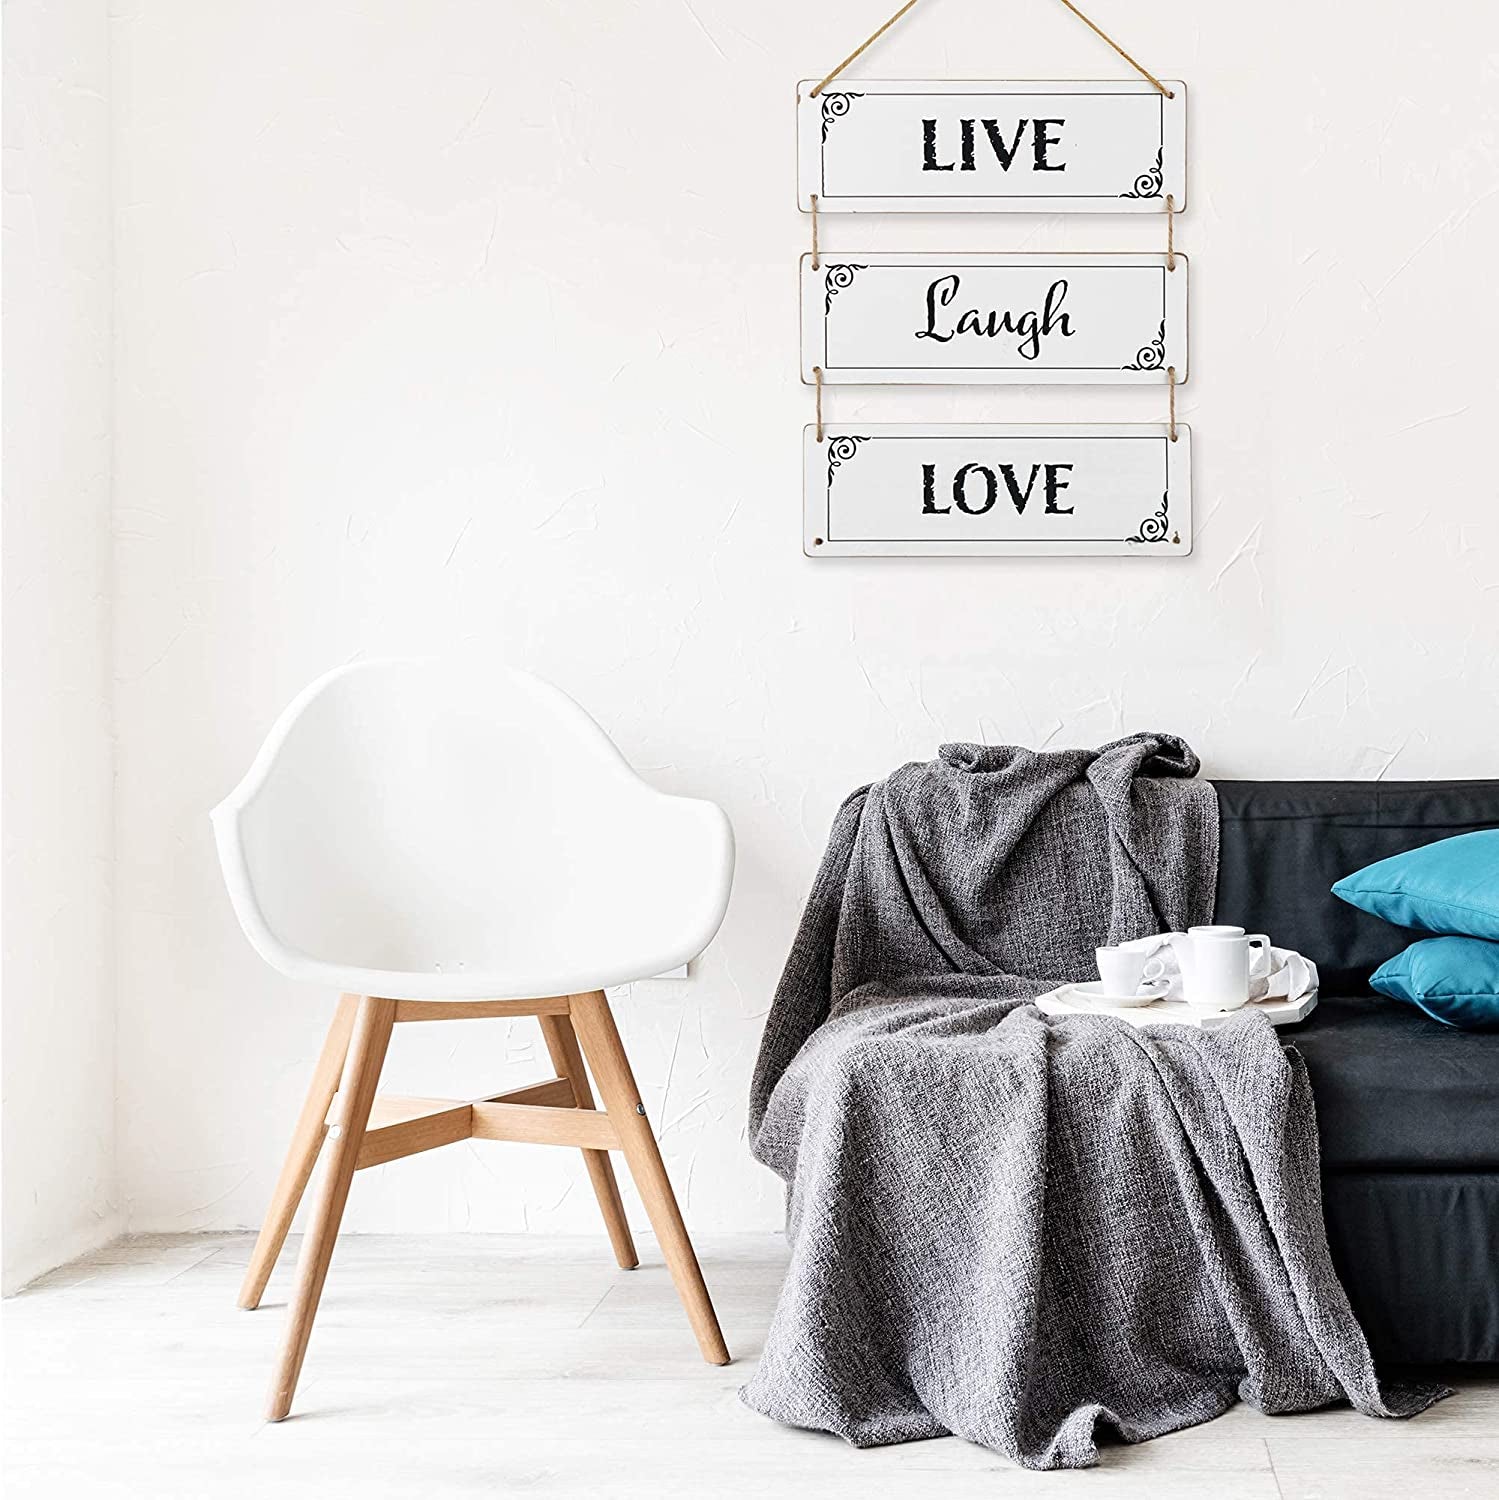 Reversible Wood Wall Hanging Sign for Farmhouse and Living Room, Rustic Wood Wall Decor Accessories for Bedroom Office Bar, Decorative Vertical Wall Plaque (Live Laugh Love)